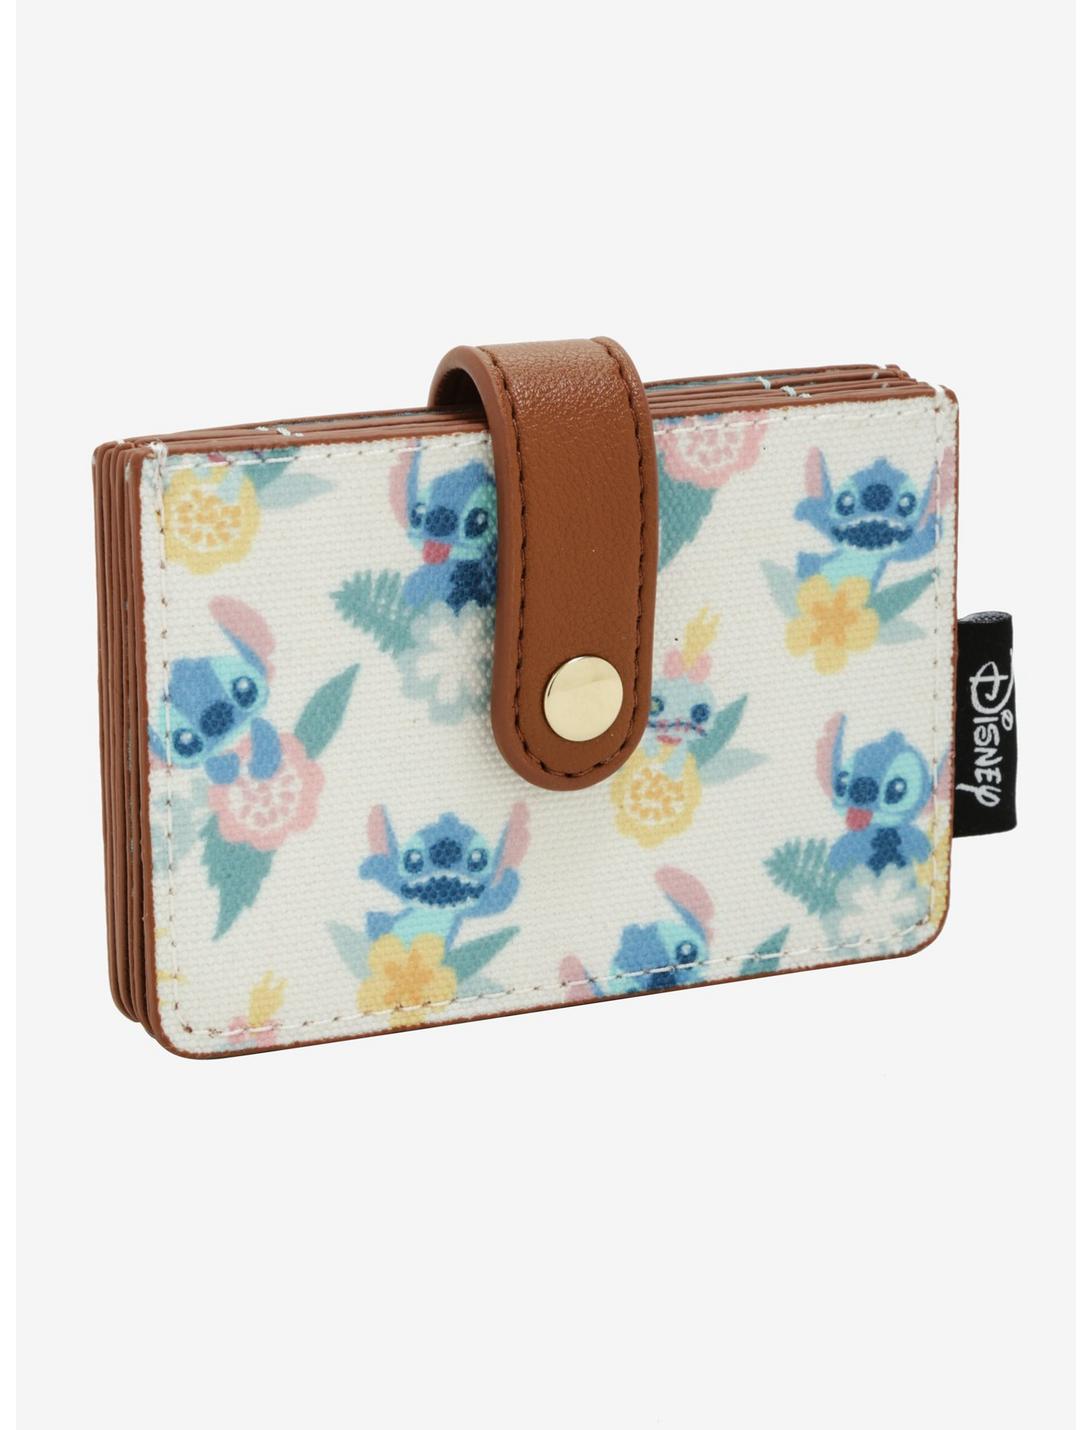 Loungefly Disney Lilo & Stitch Tropical Crossbody Bag - BoxLunch Exclusive, BoxLunch